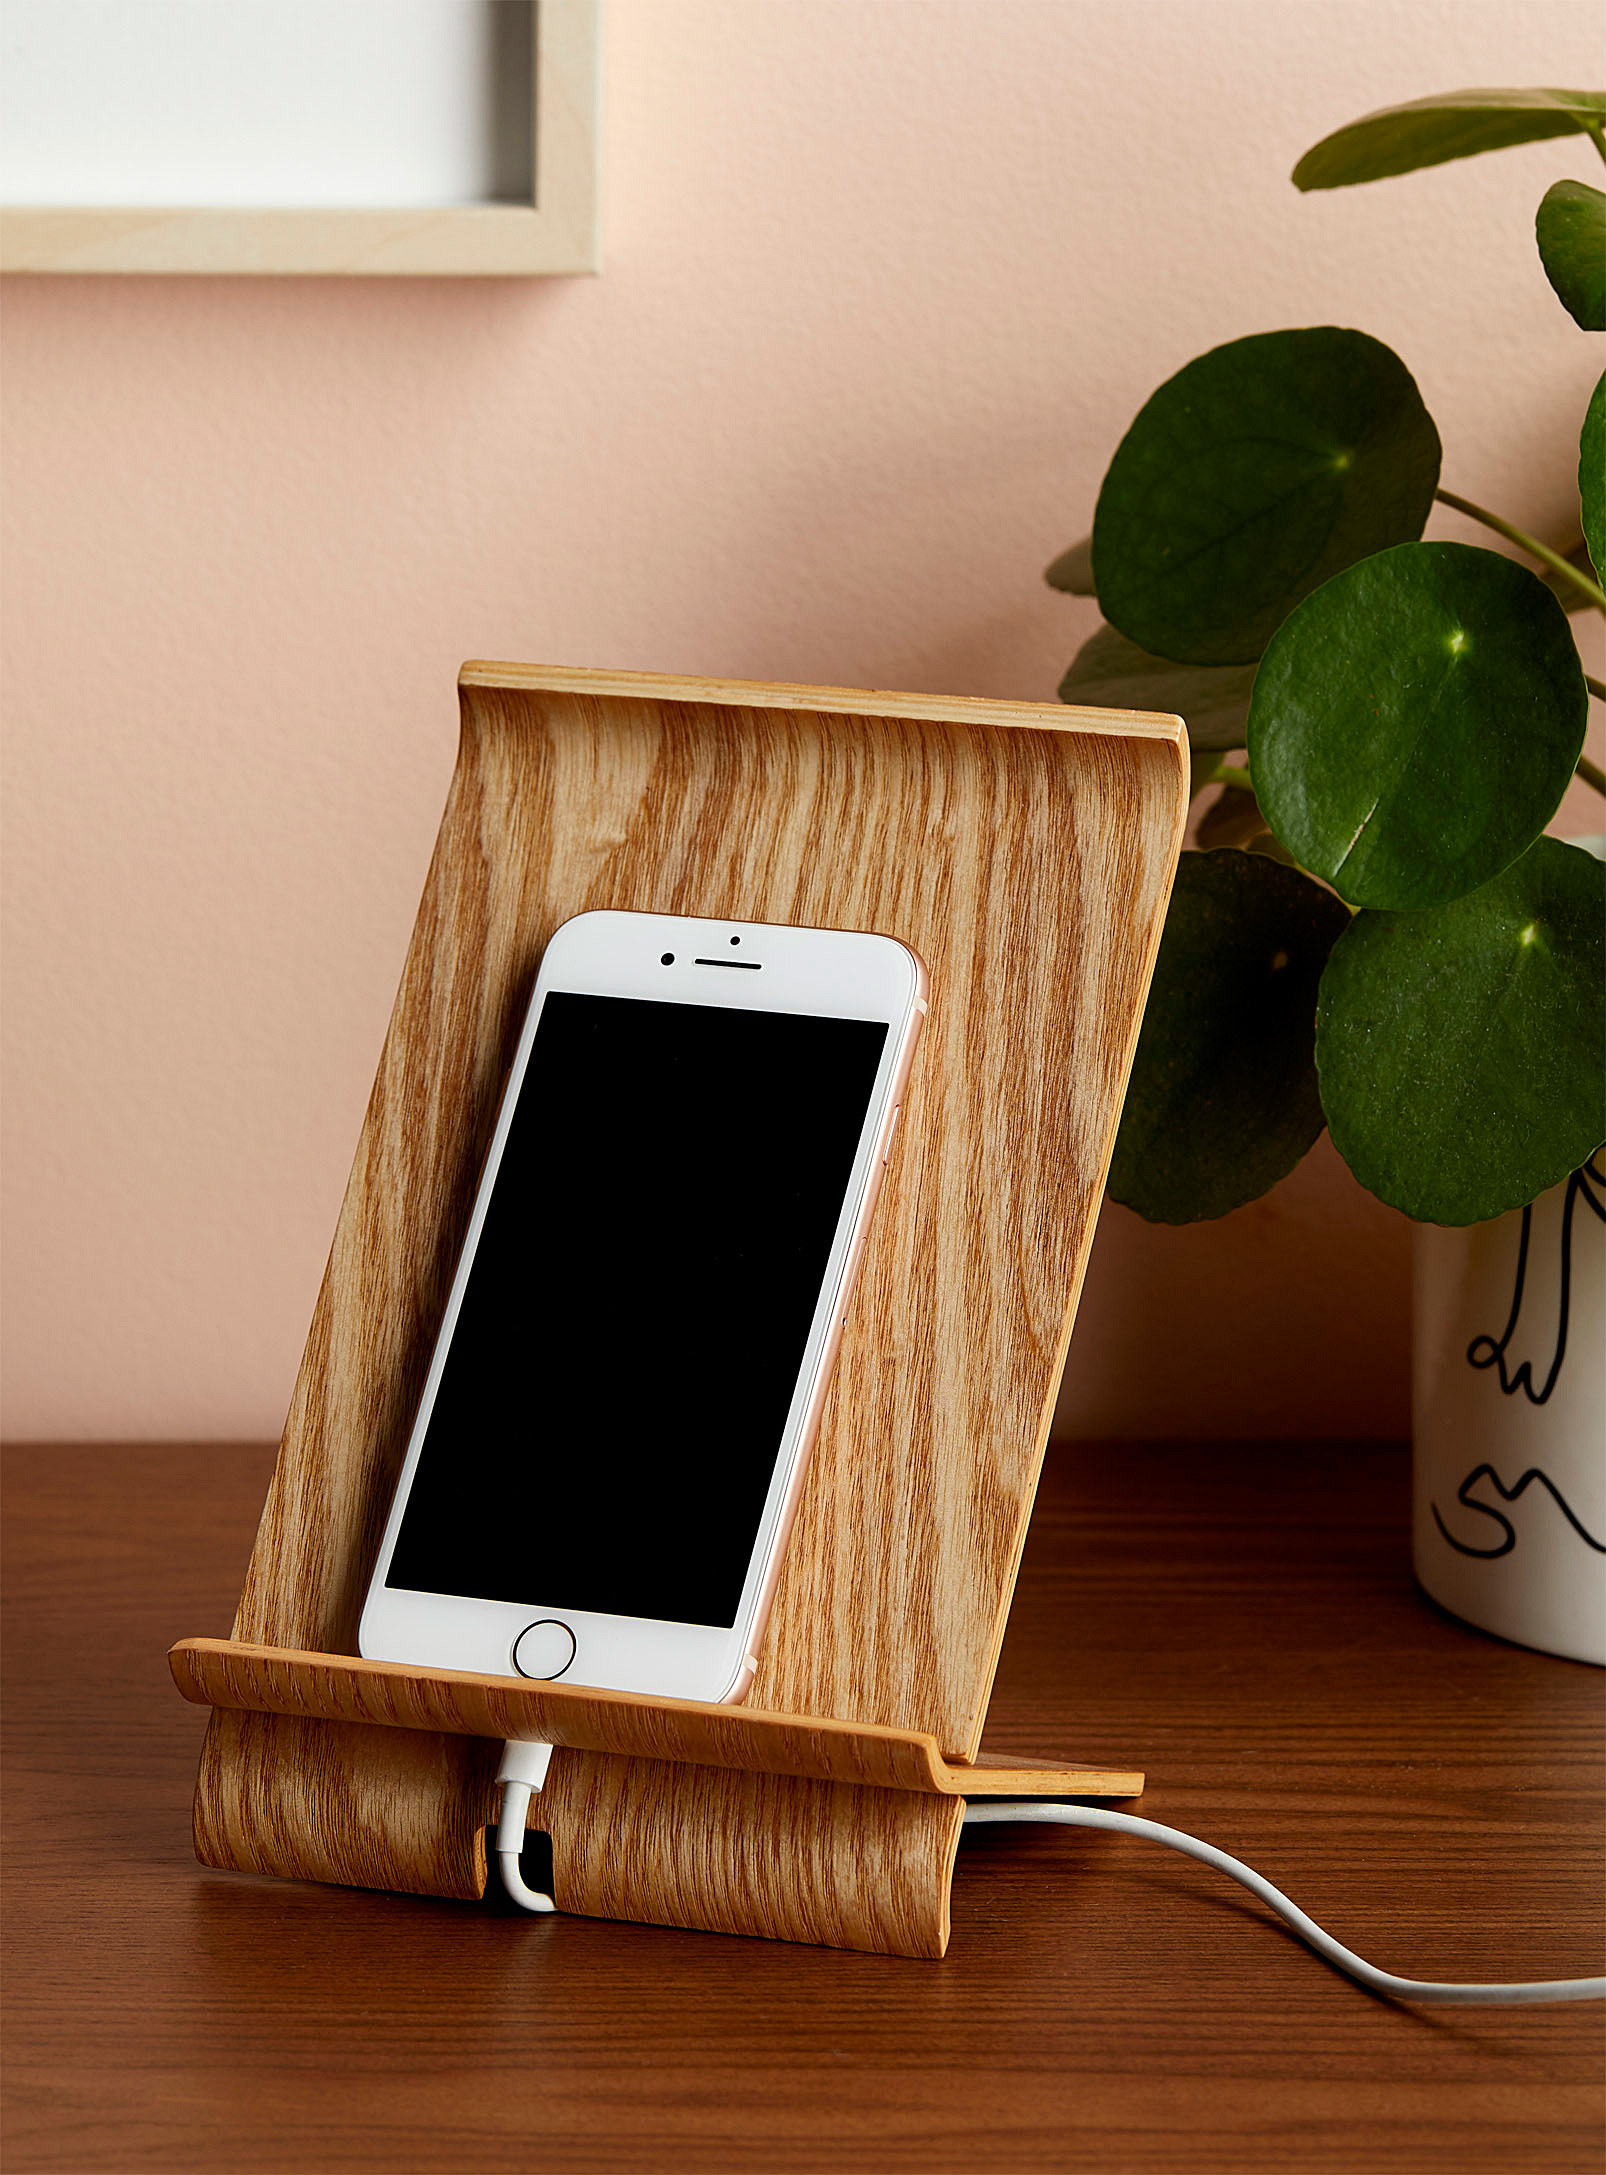 An iPhone charging and propped up on a wooden stand